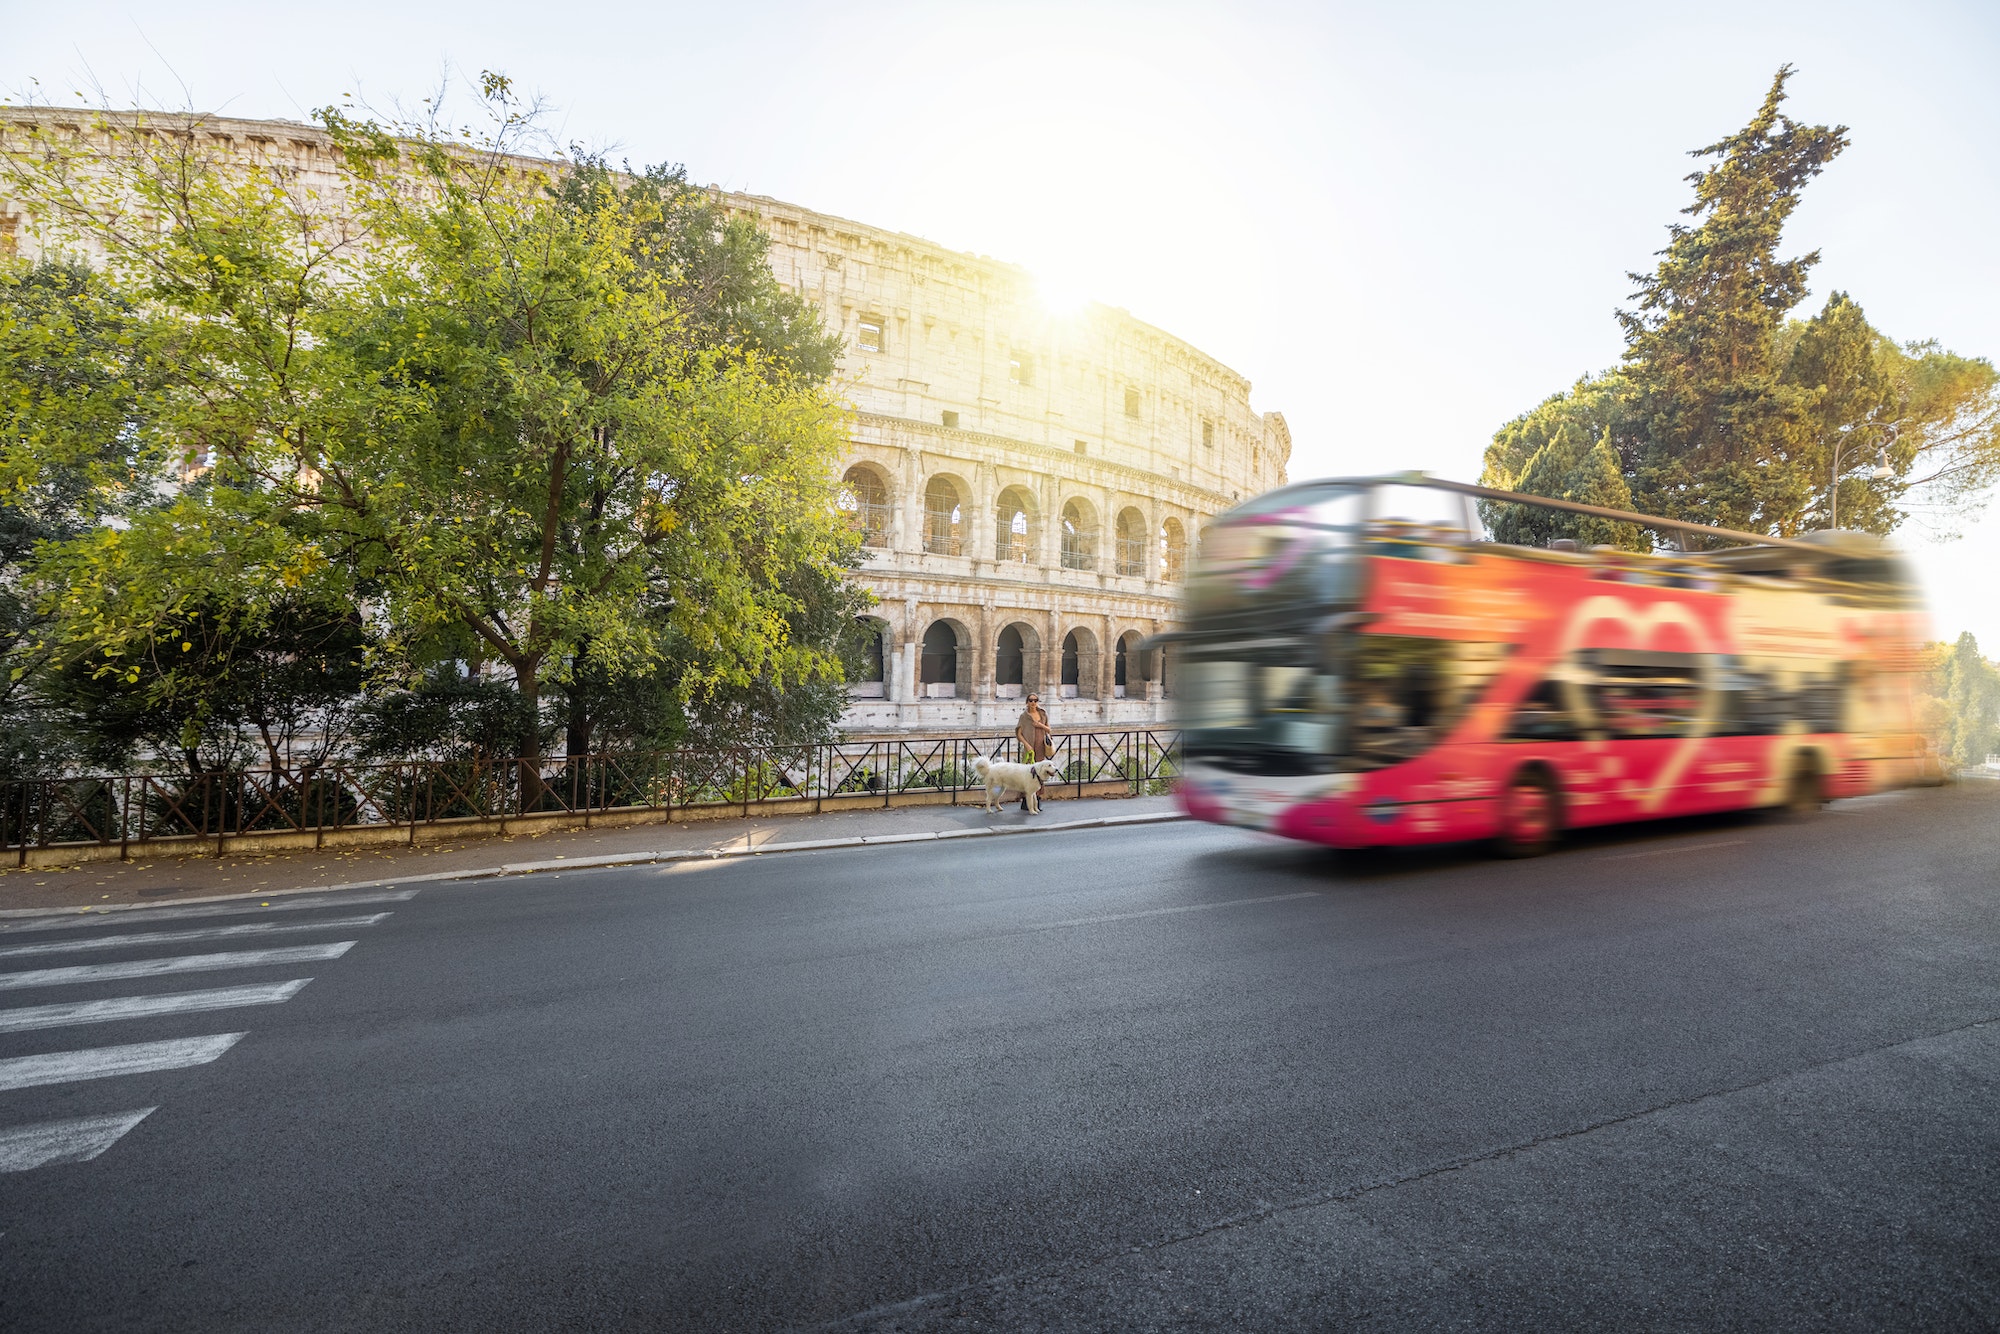 Street view with motion blurred tourist bus and Colosseum in Rome